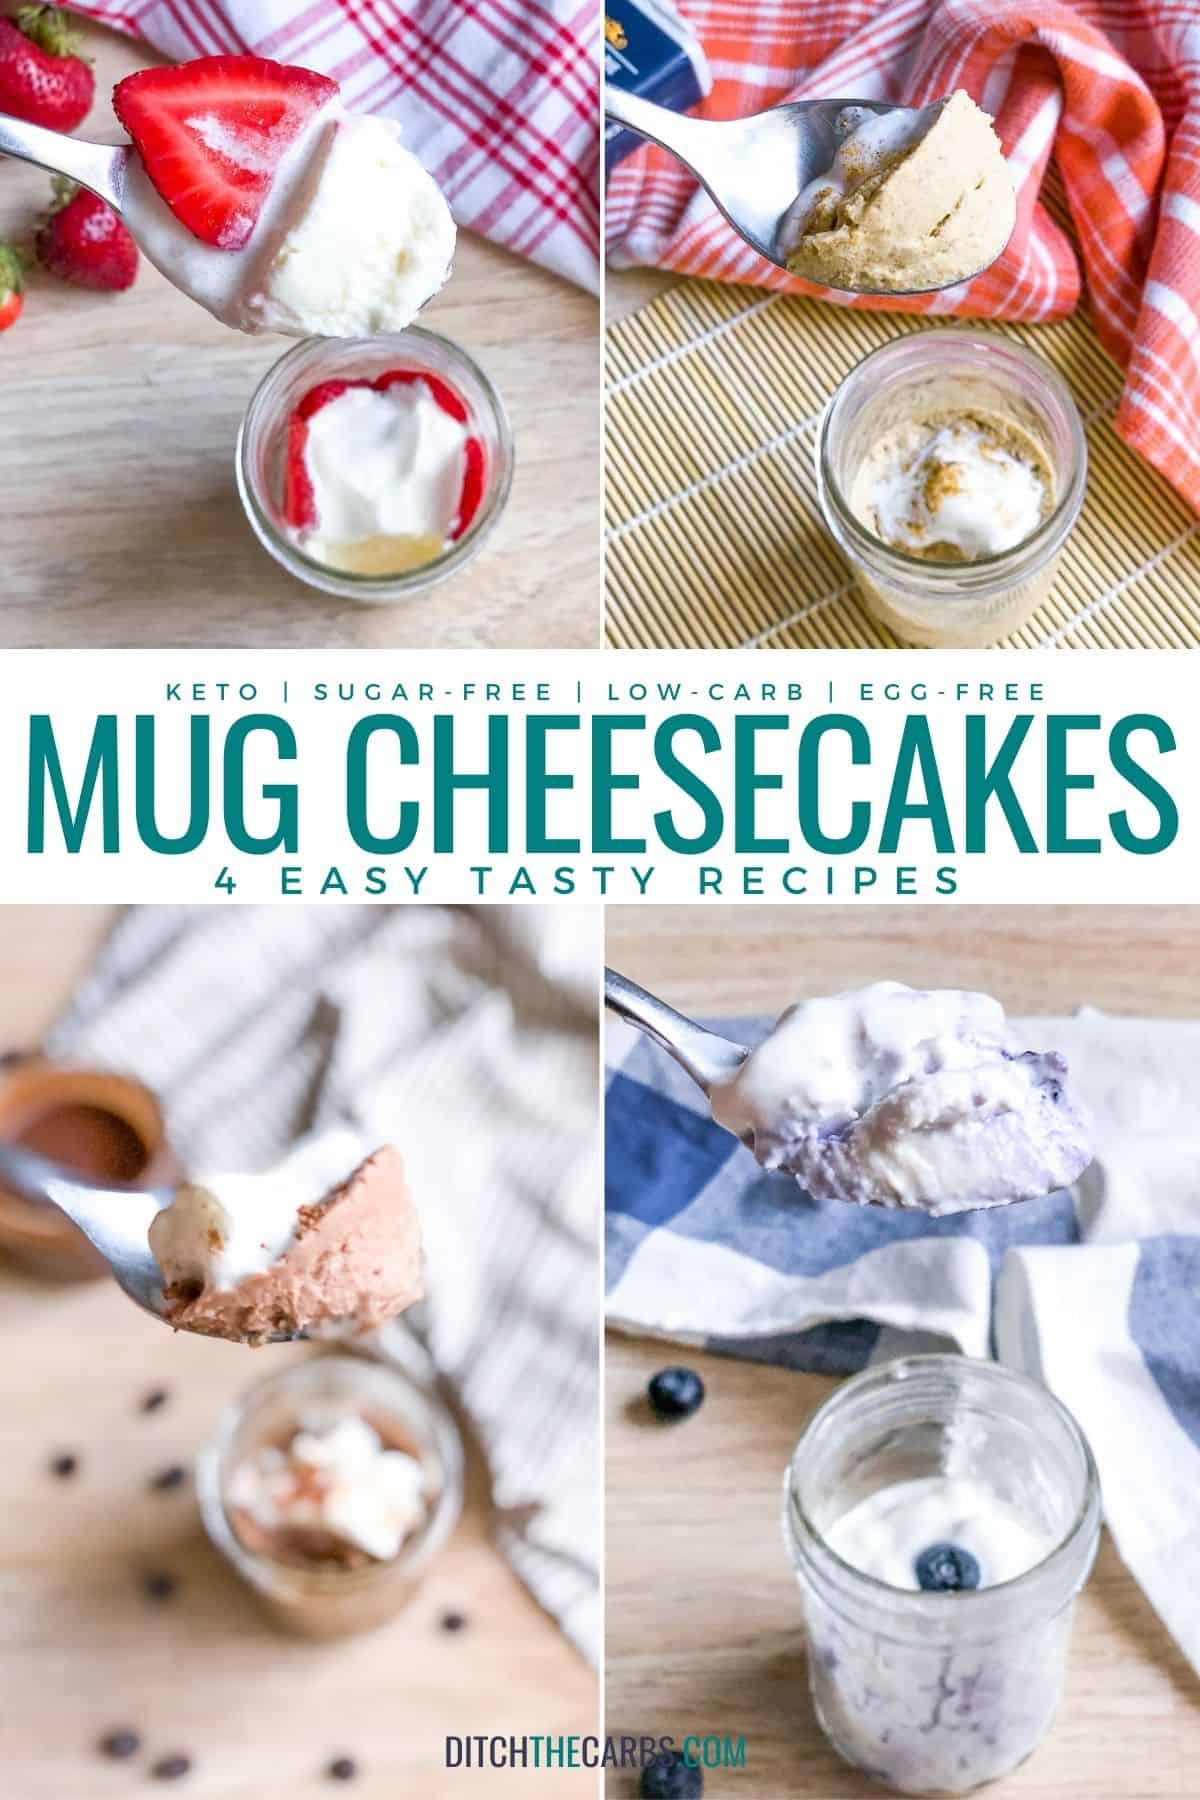 Four pictures of each cheesecake in a collage showing a spoon lifting a bite of mug cheesecake from each flavor